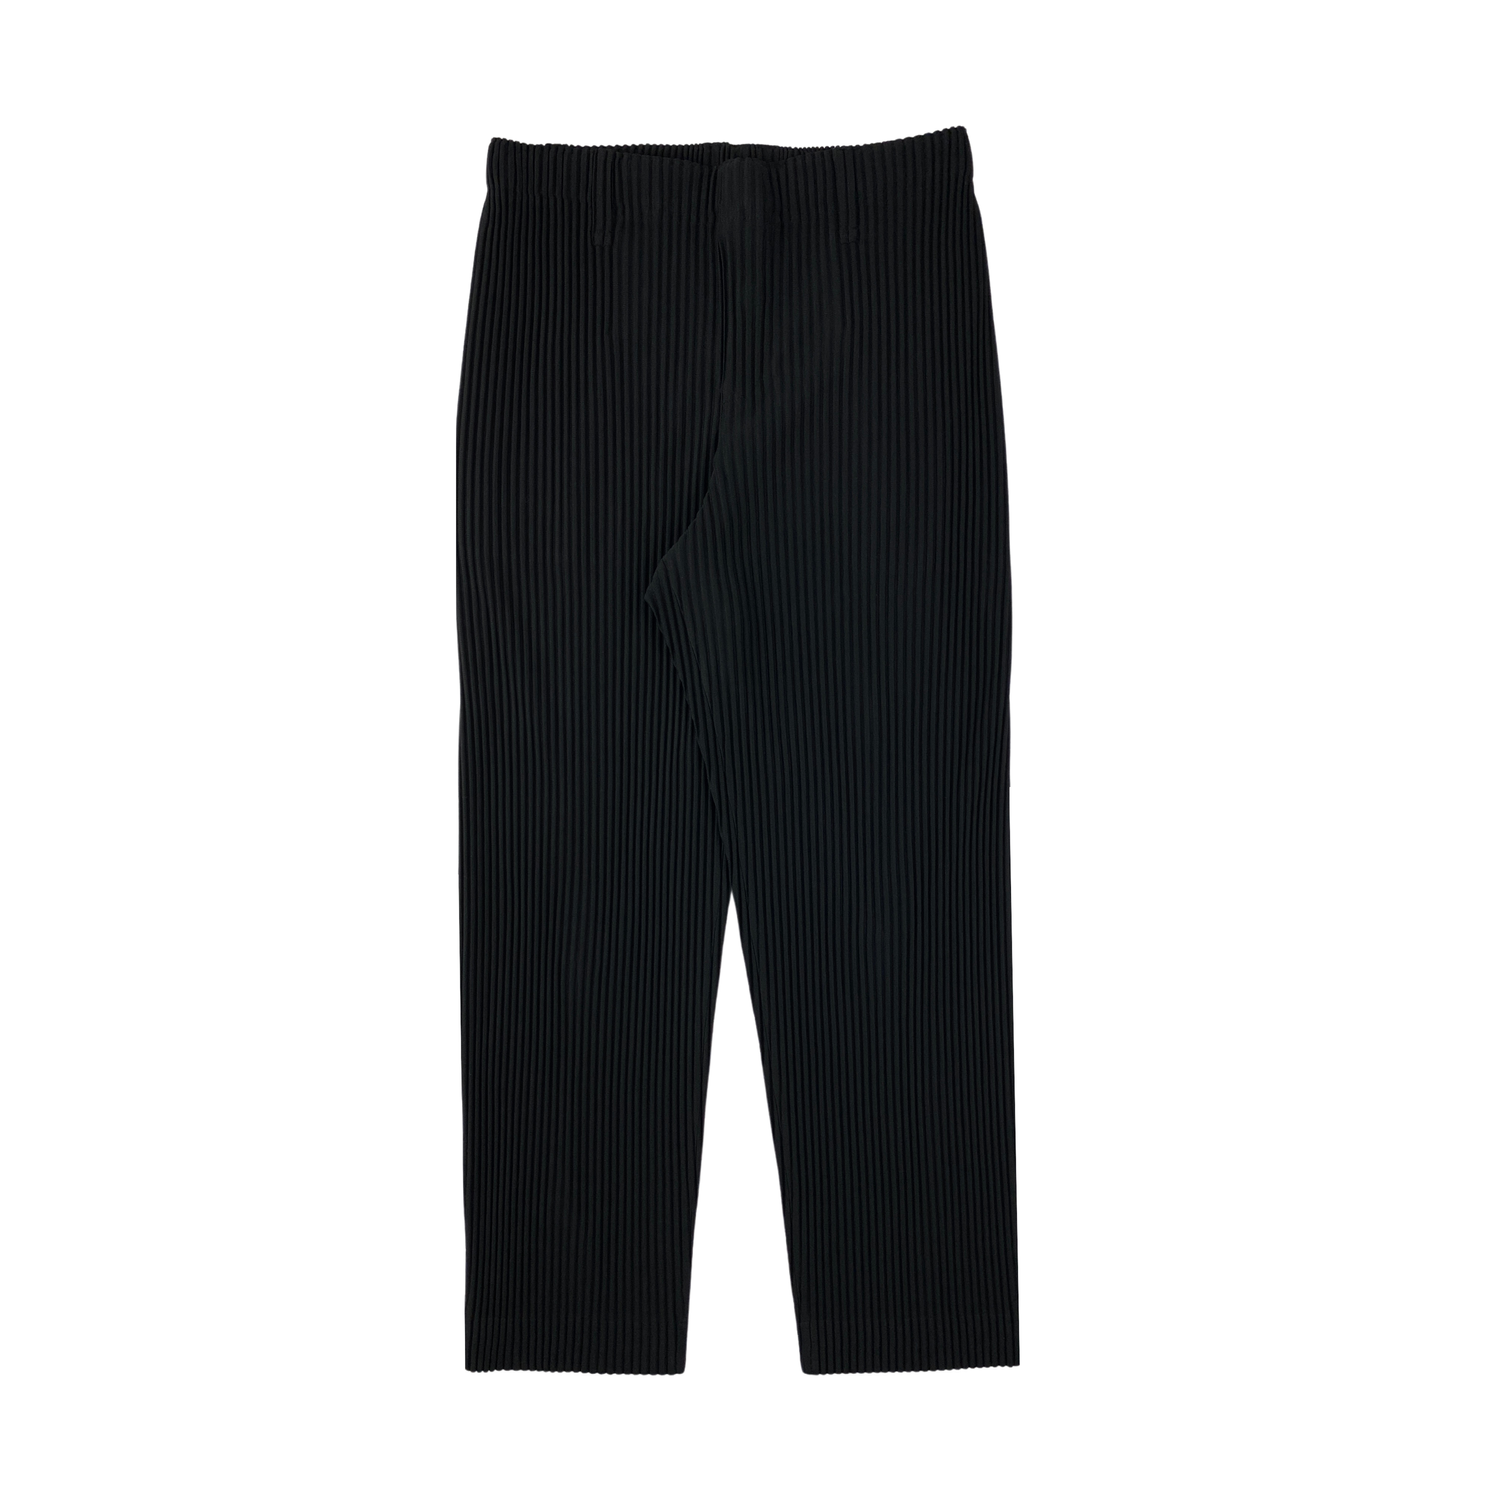 MARKED EU: Issey Miyake Homme Plisse Pleated JF150 Pants